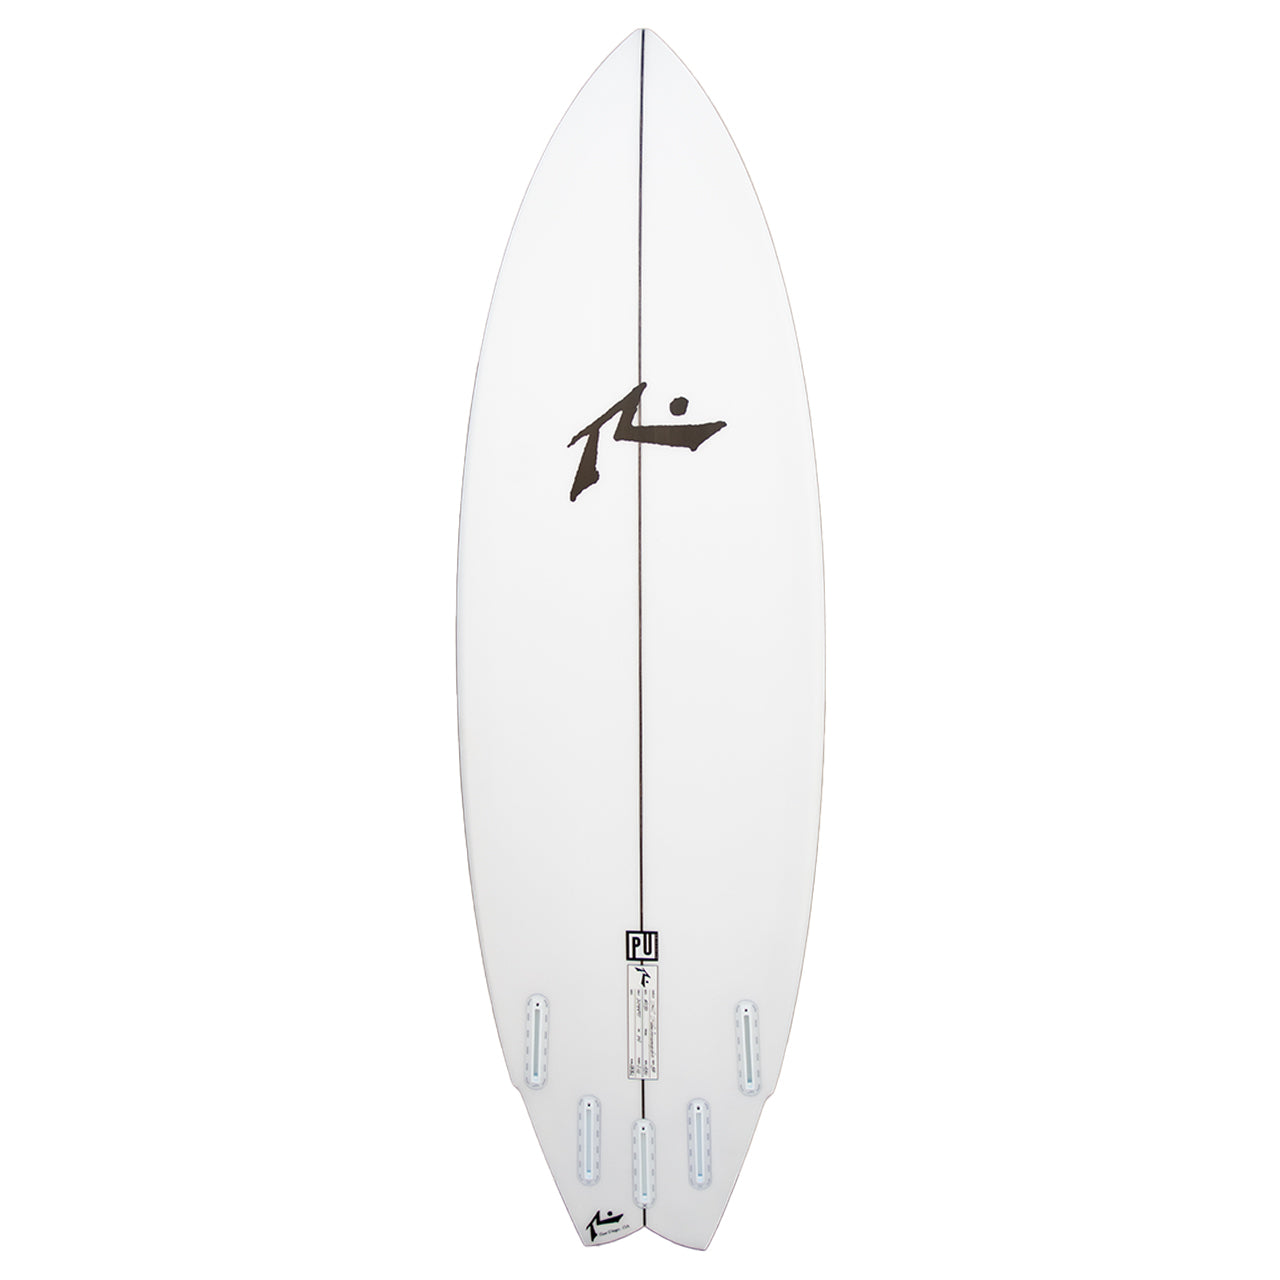 Miso - High Performance Shortboard - Rusty Surfboards - Top View